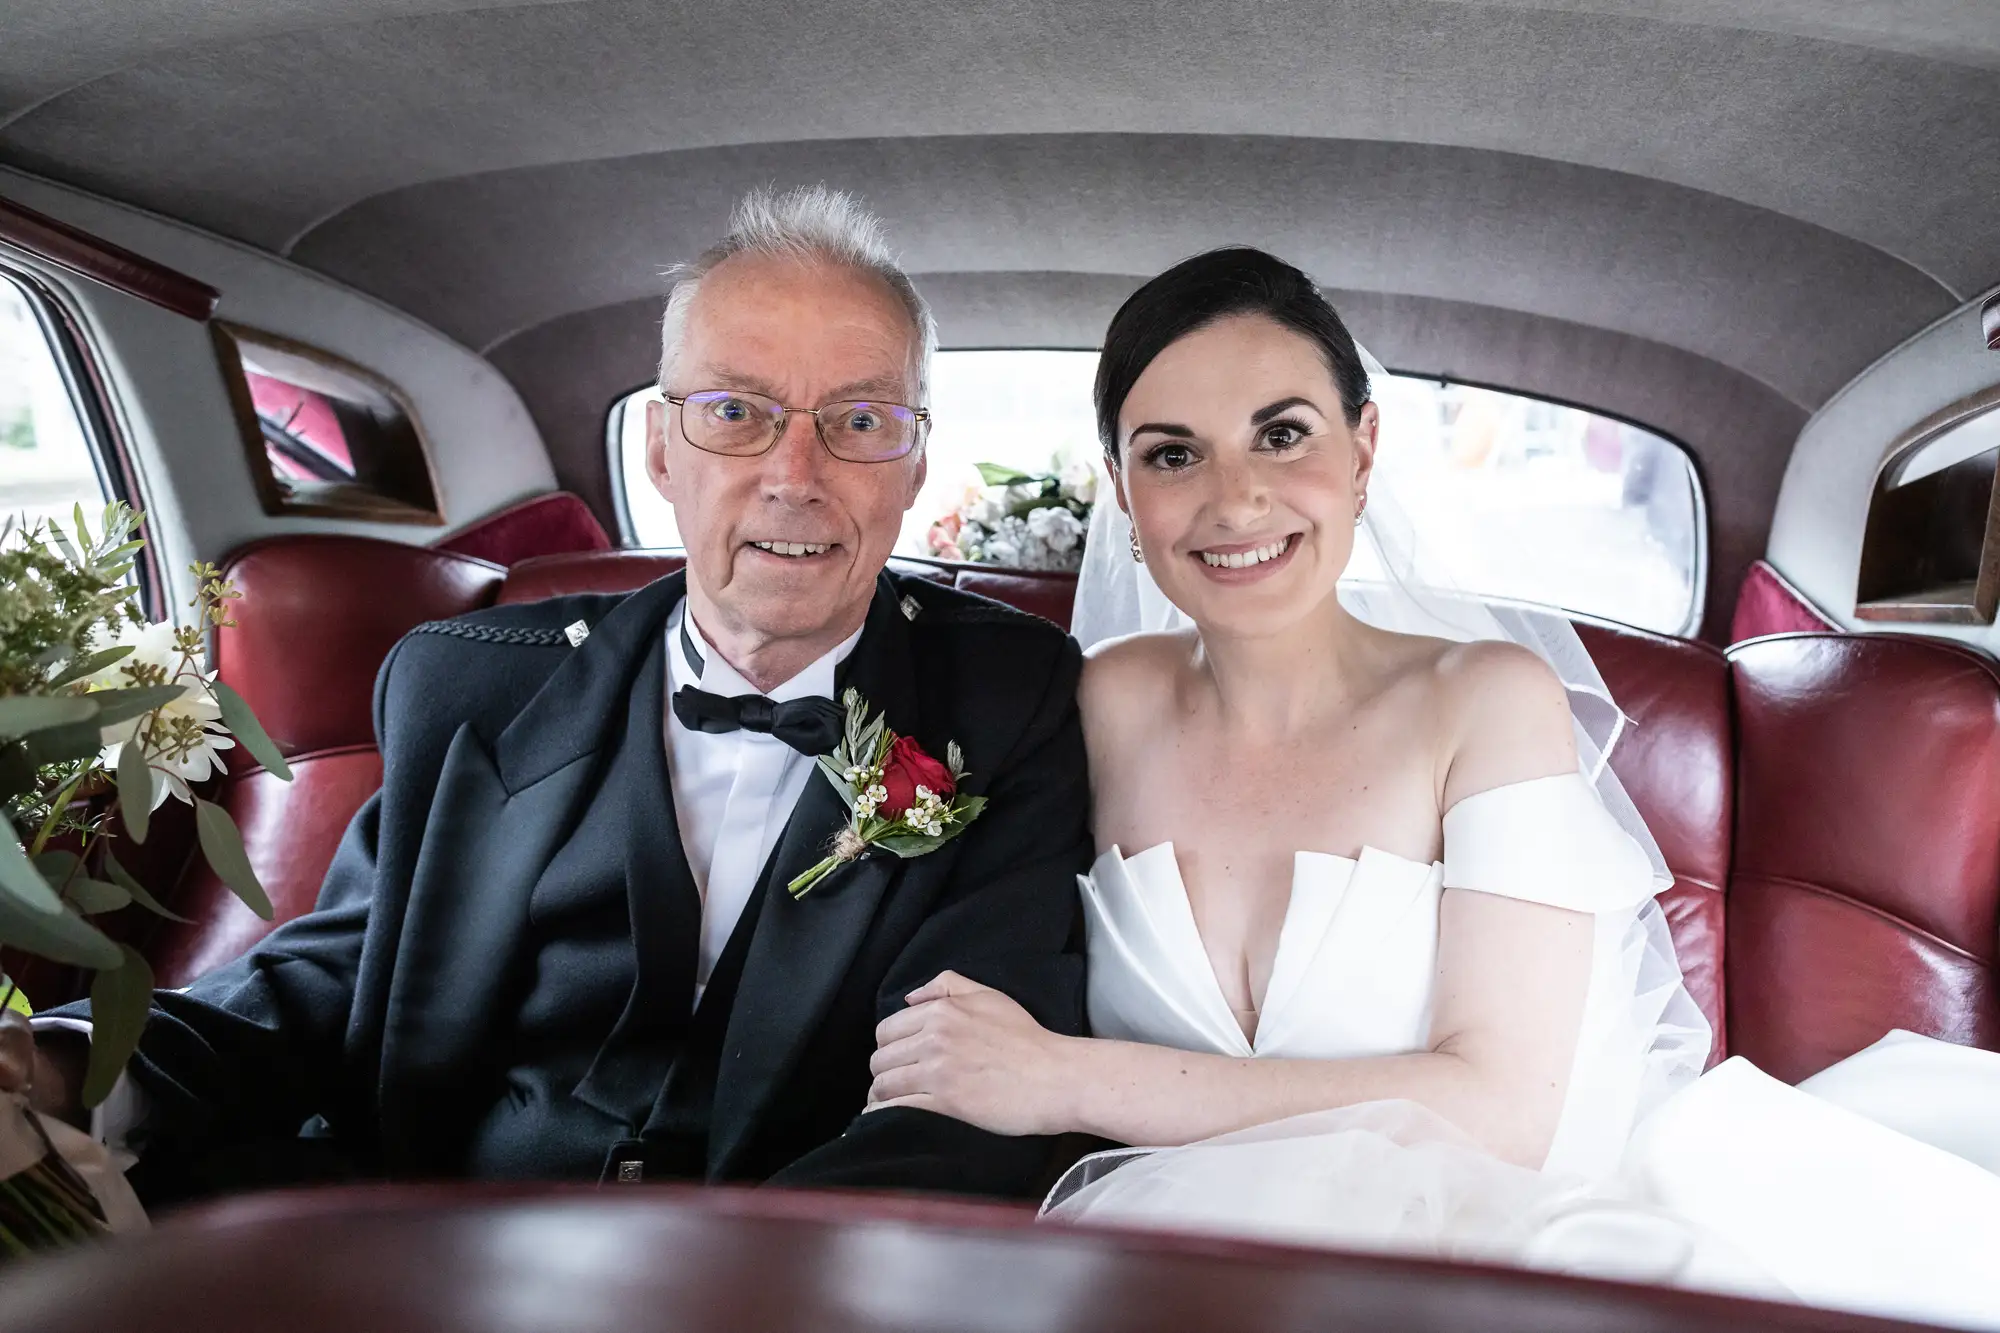 An elderly man and a young woman in formal attire smiling inside a vintage car with red leather seats.